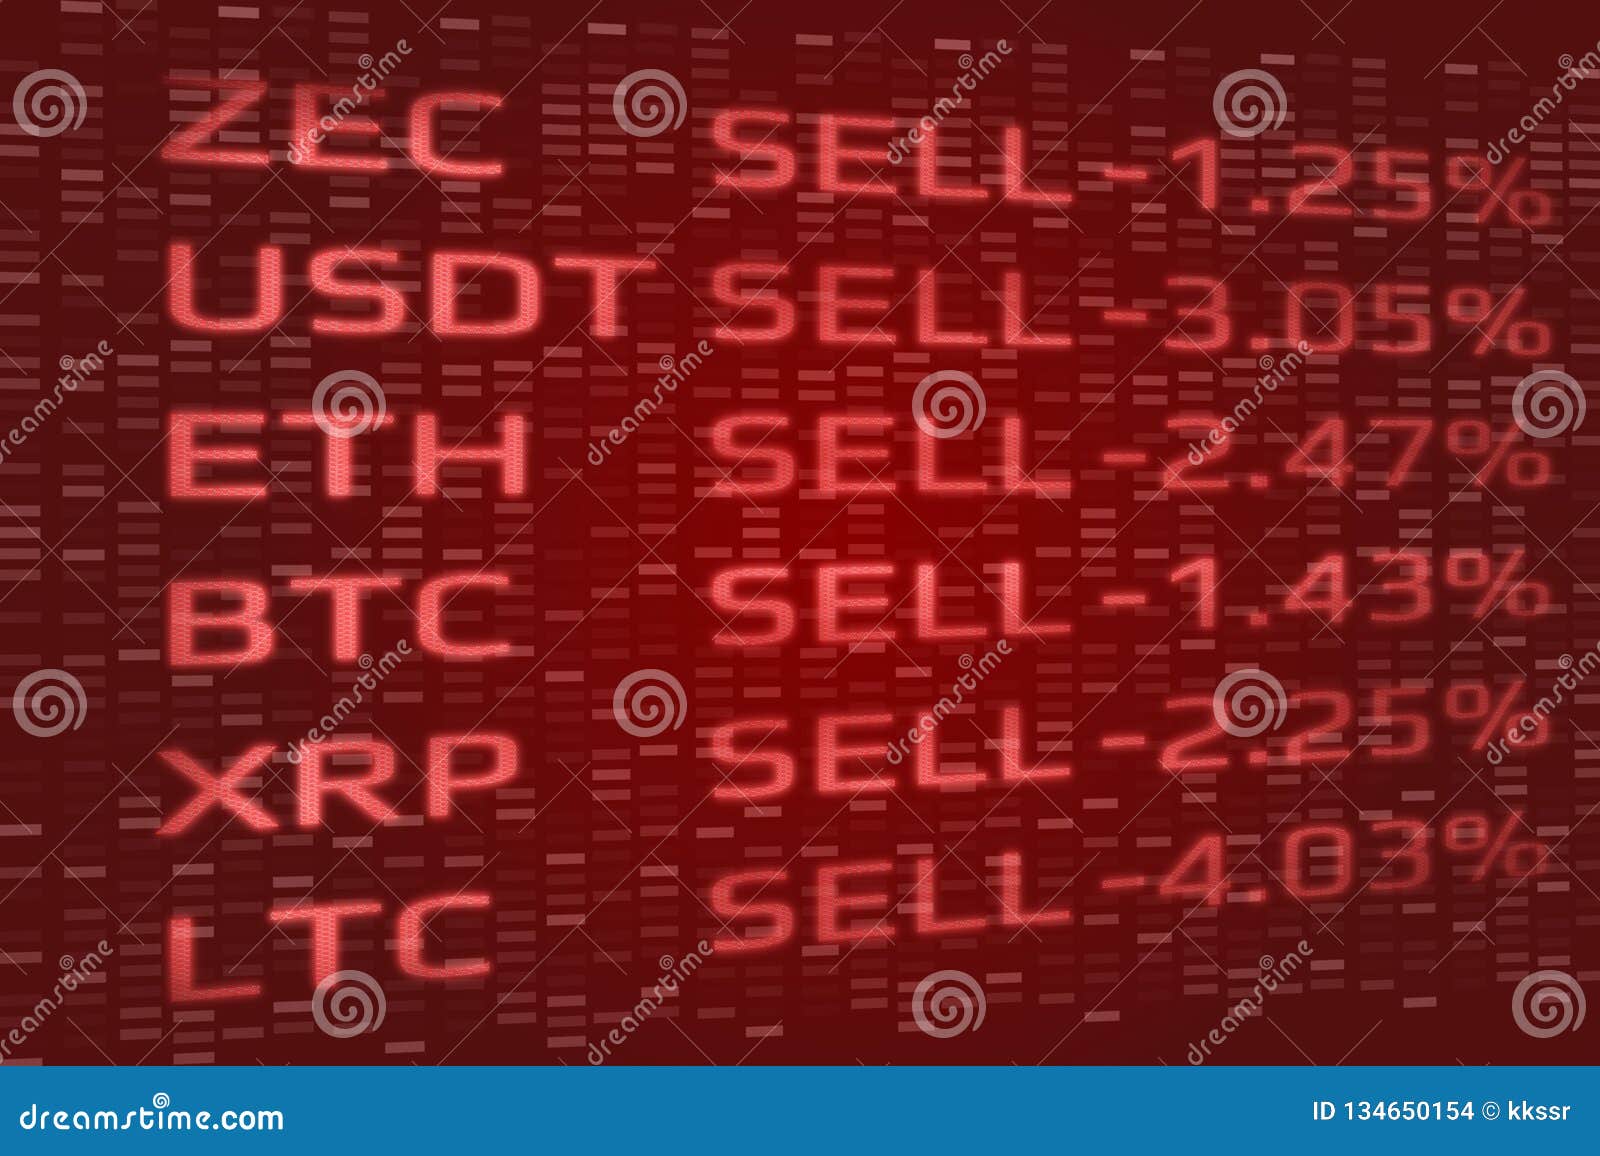 cryptocurrency panic selling